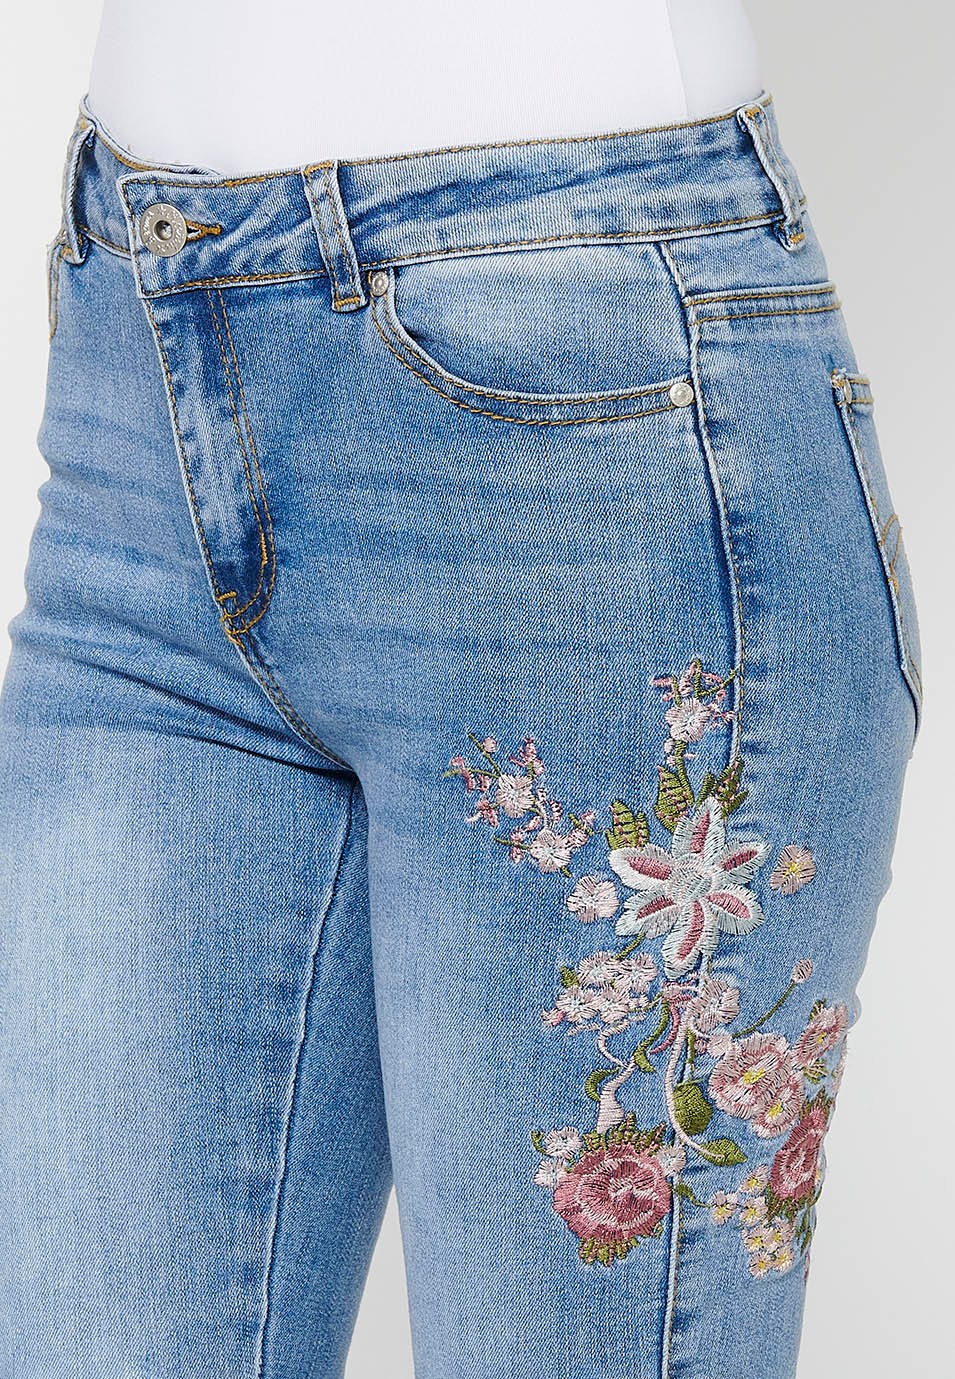 Slim long pants with front zipper and button closure with embroidered details in Blue for Women 6